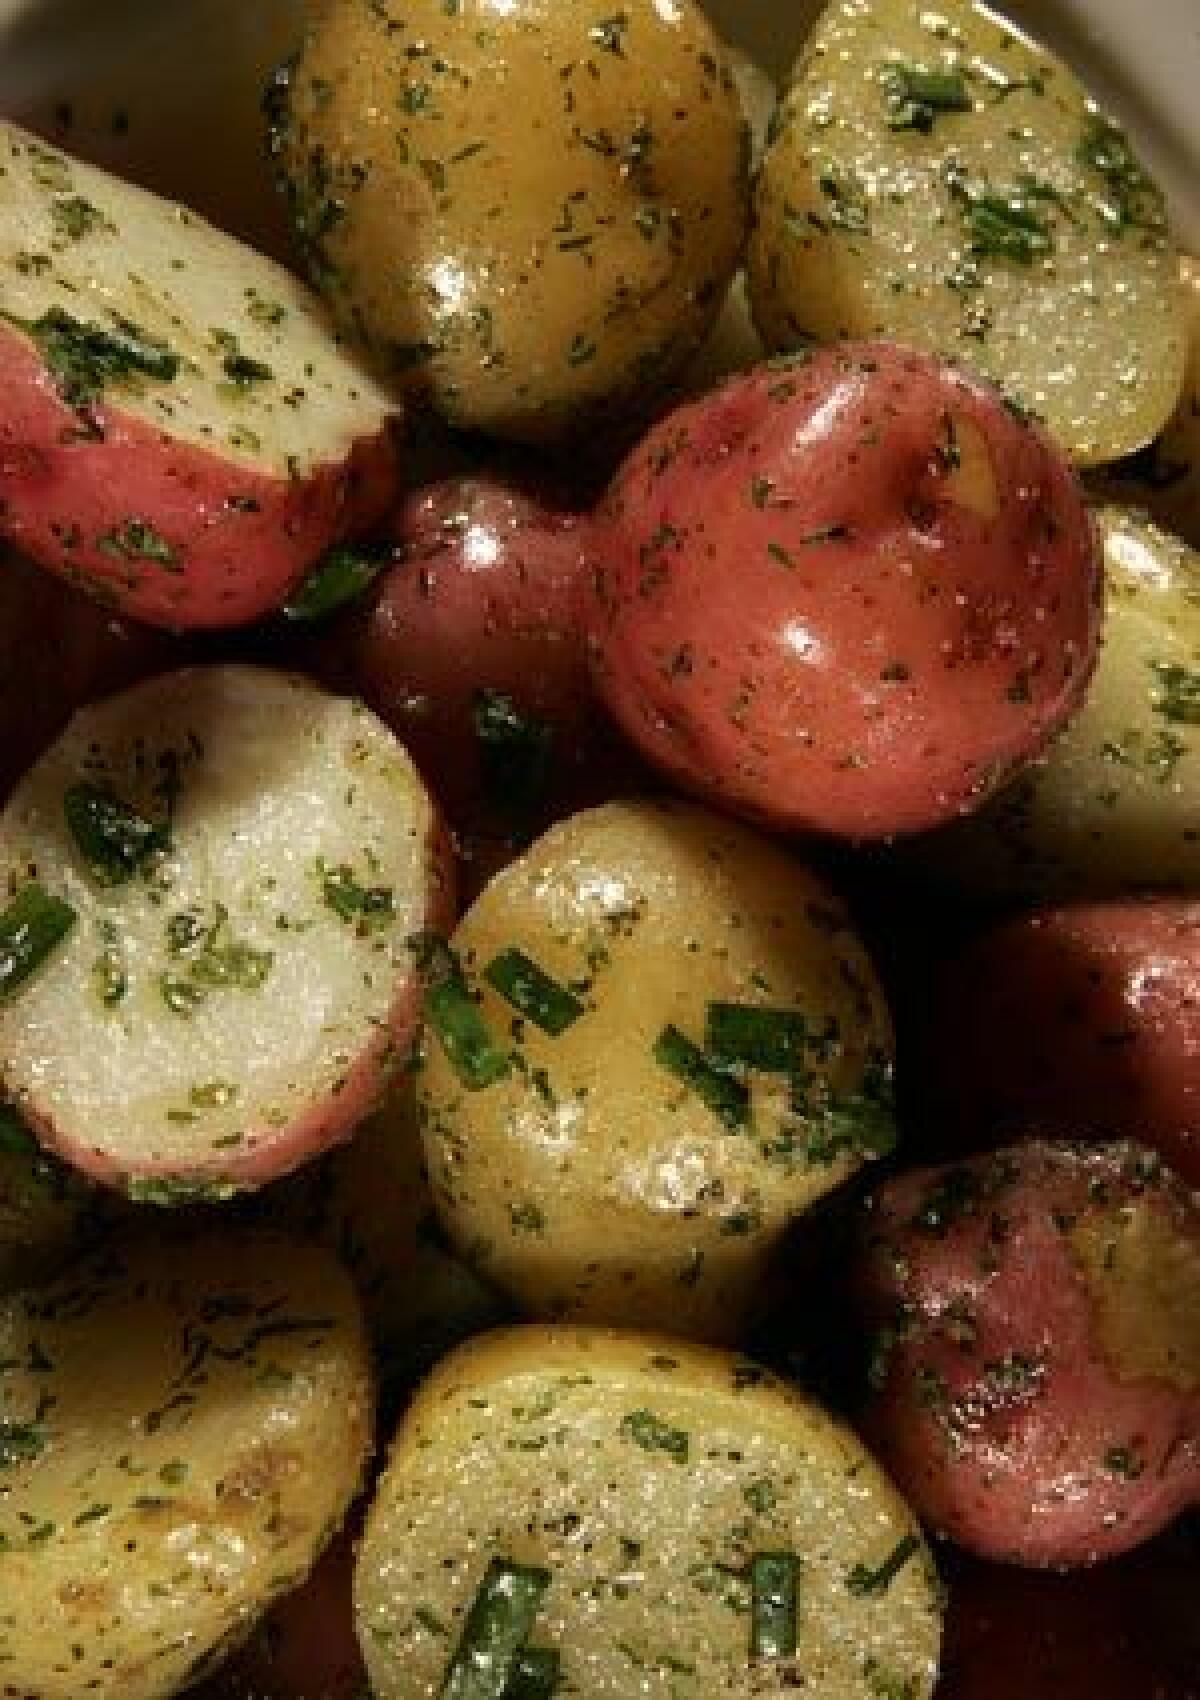 DELICATE: Fresh herbs add bright flavor to red and white potatoes. Click here for the recipe.